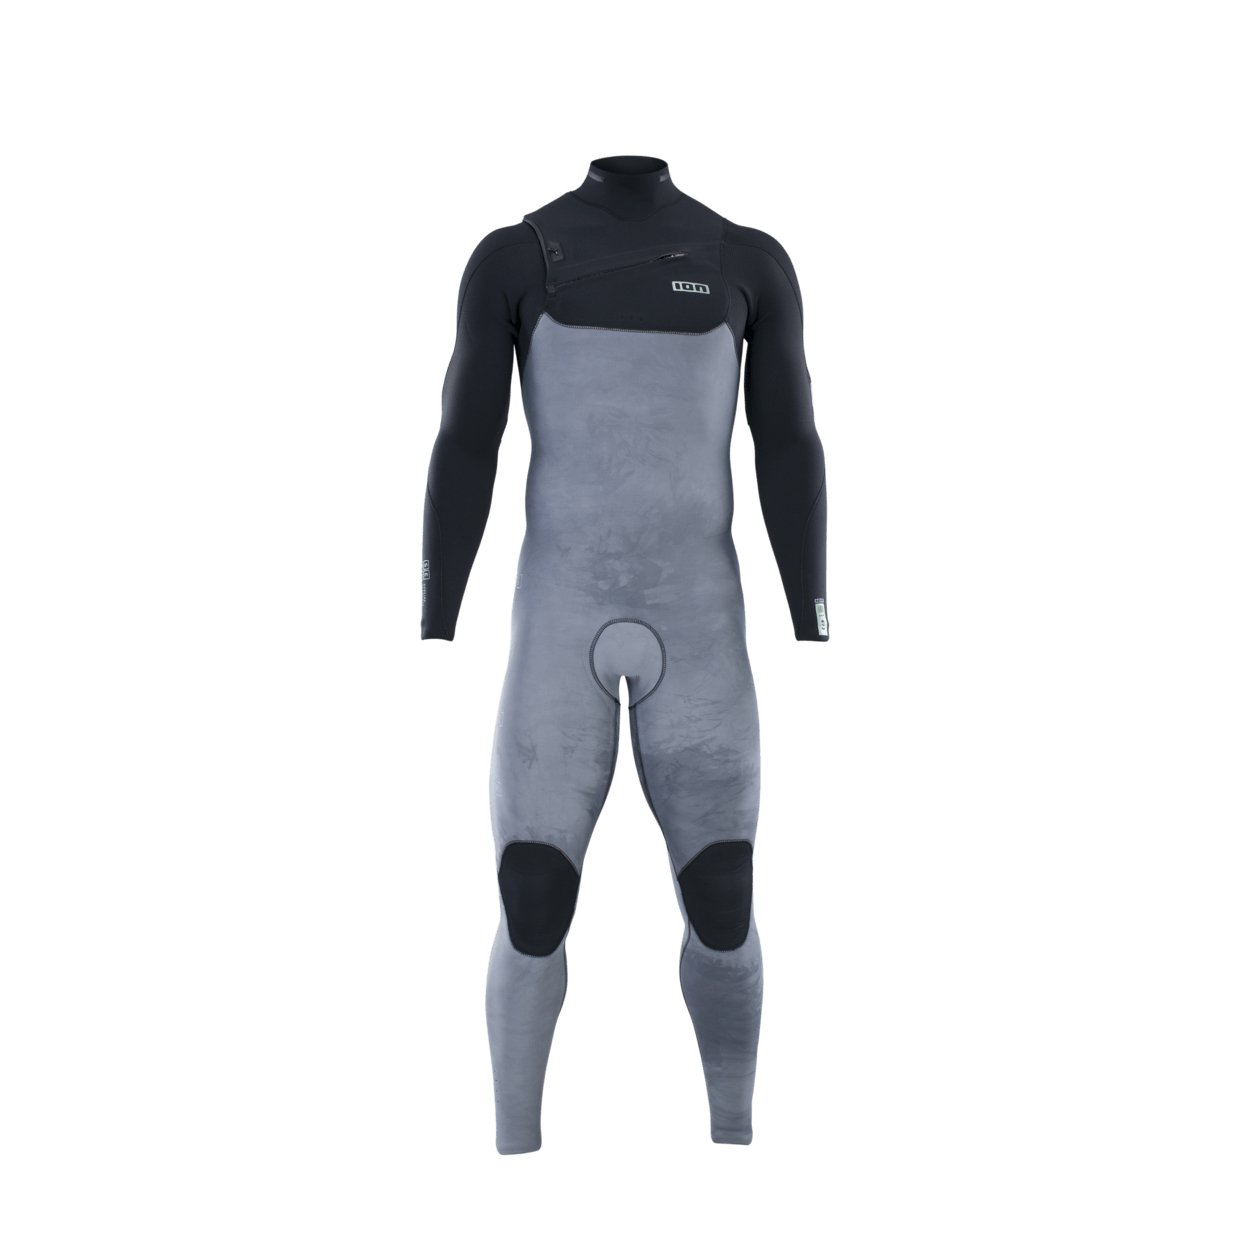 ION Seek Amp 4/3 Front Zip 2023 - Worthing Watersports - 9010583084879 - Wetsuits - ION Water